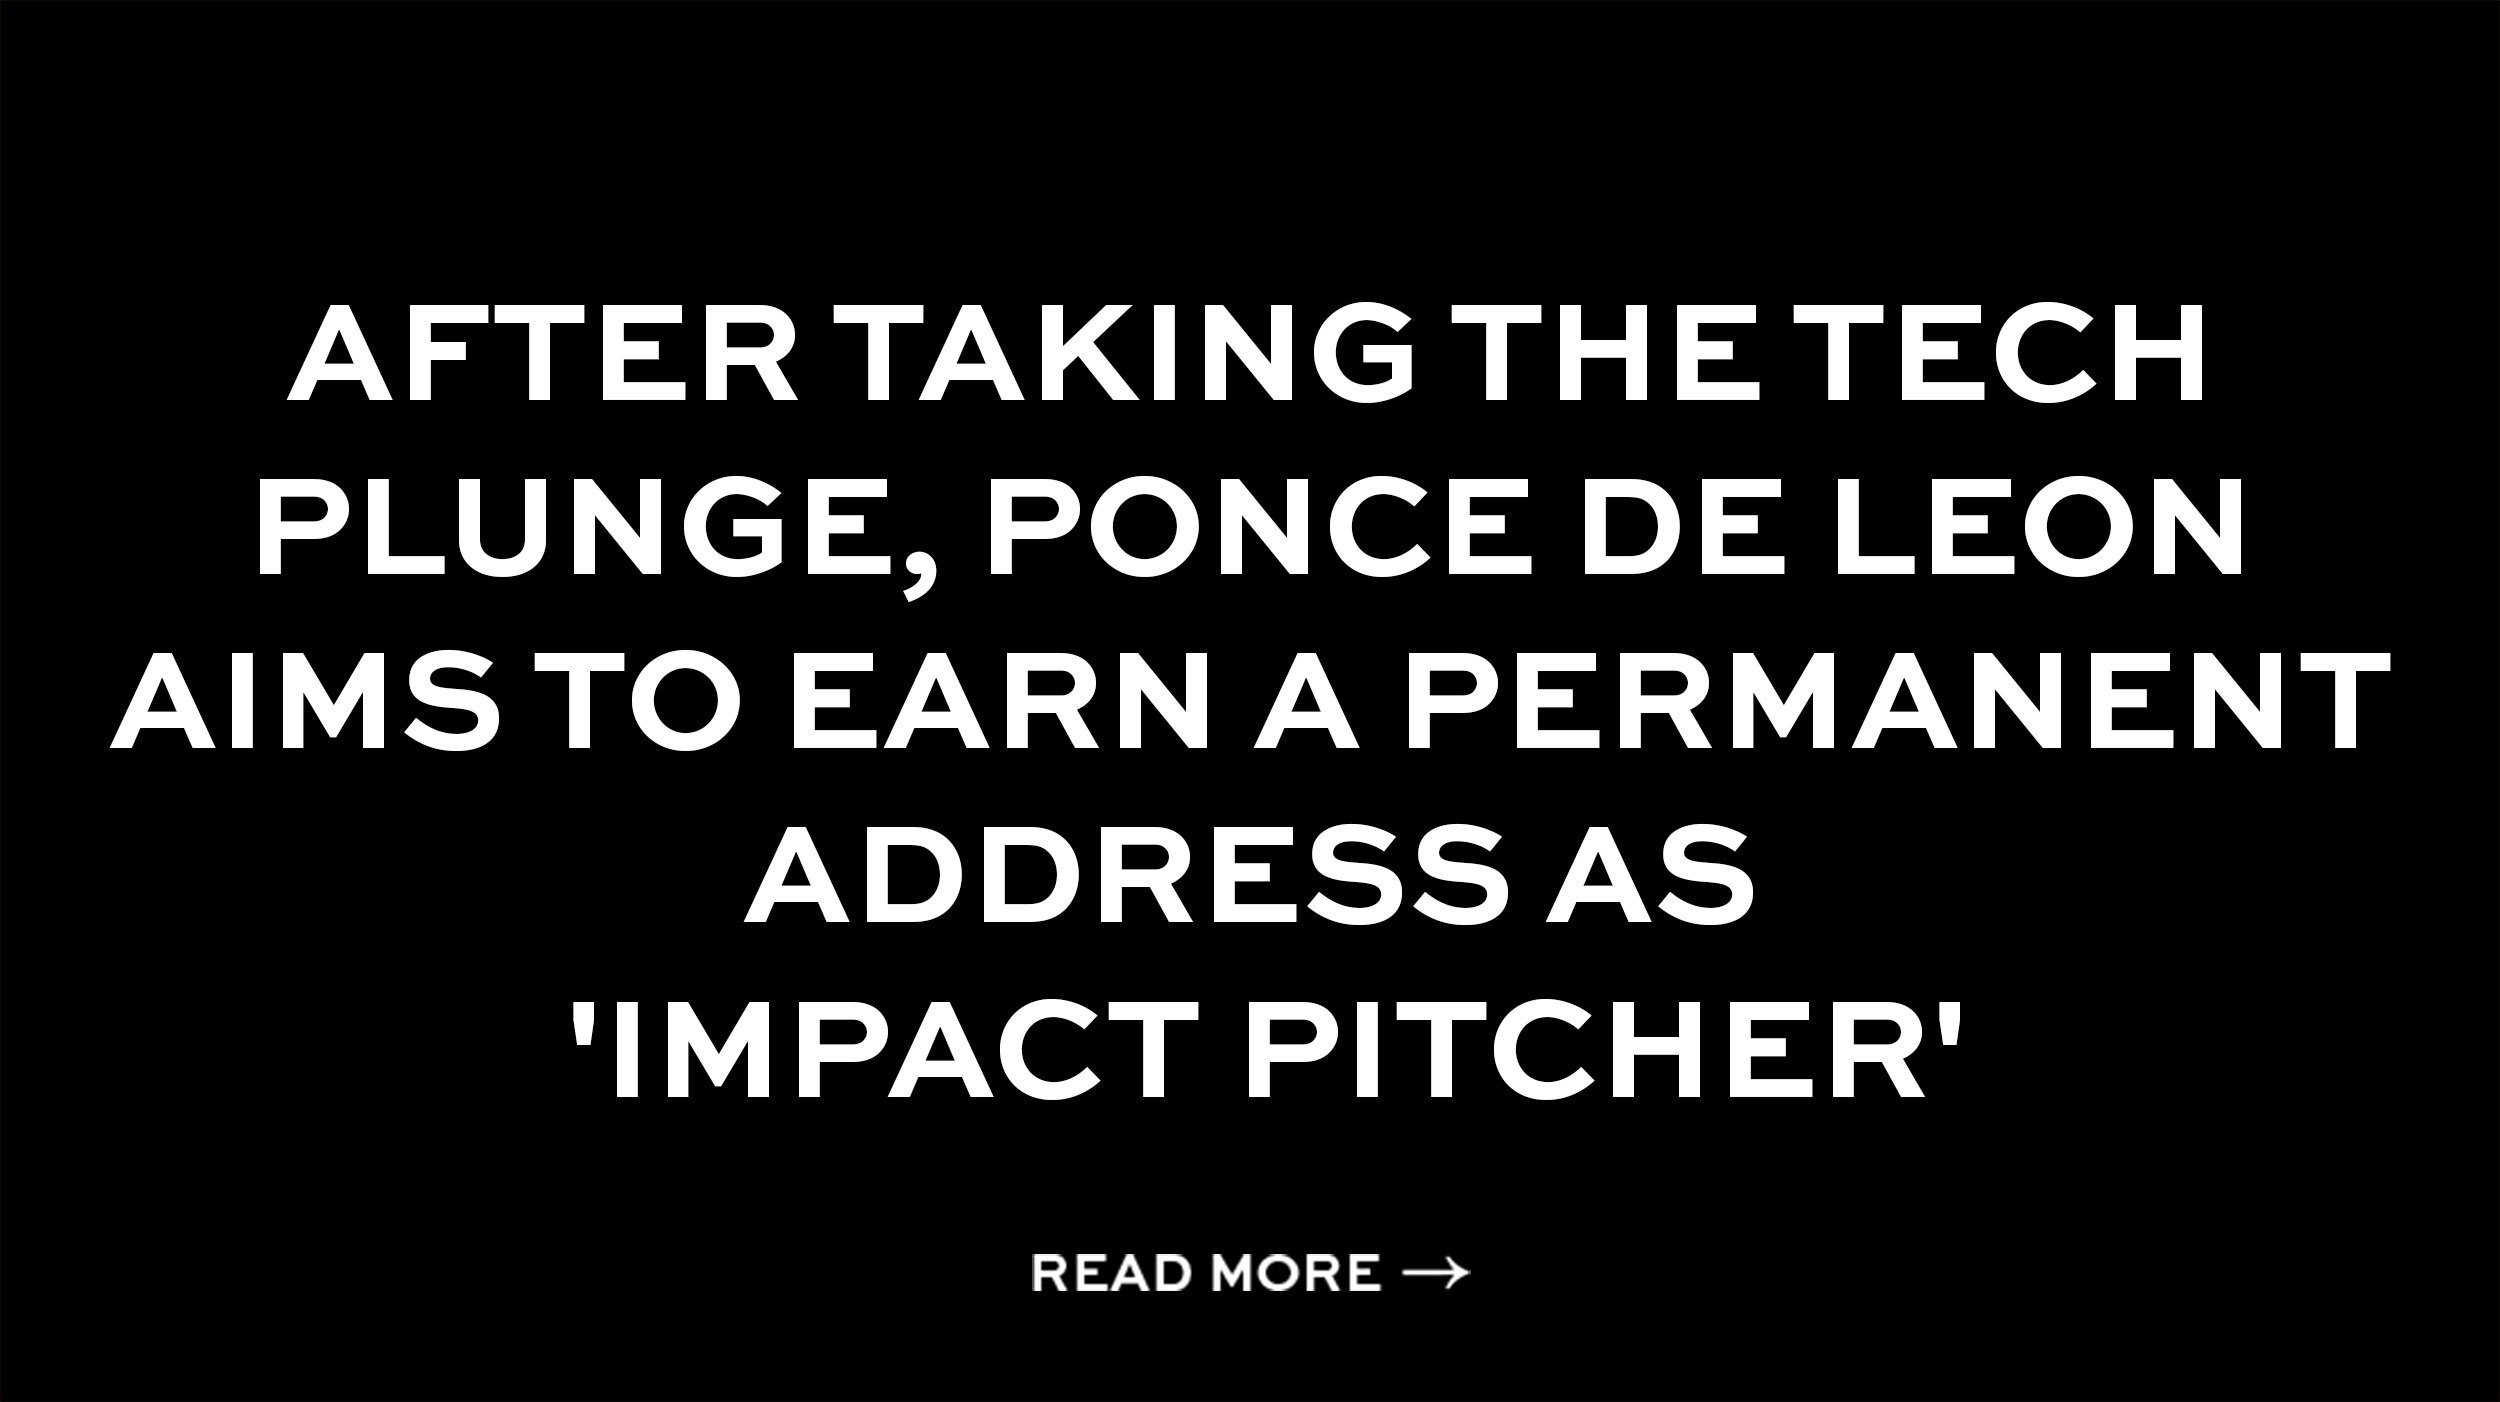 AFTER TAKING THE TECH PLUNGE, PONCE DE LEON AIMS TO EARN A PERMANENT ADDRESS AS 'IMPACT PITCHER'